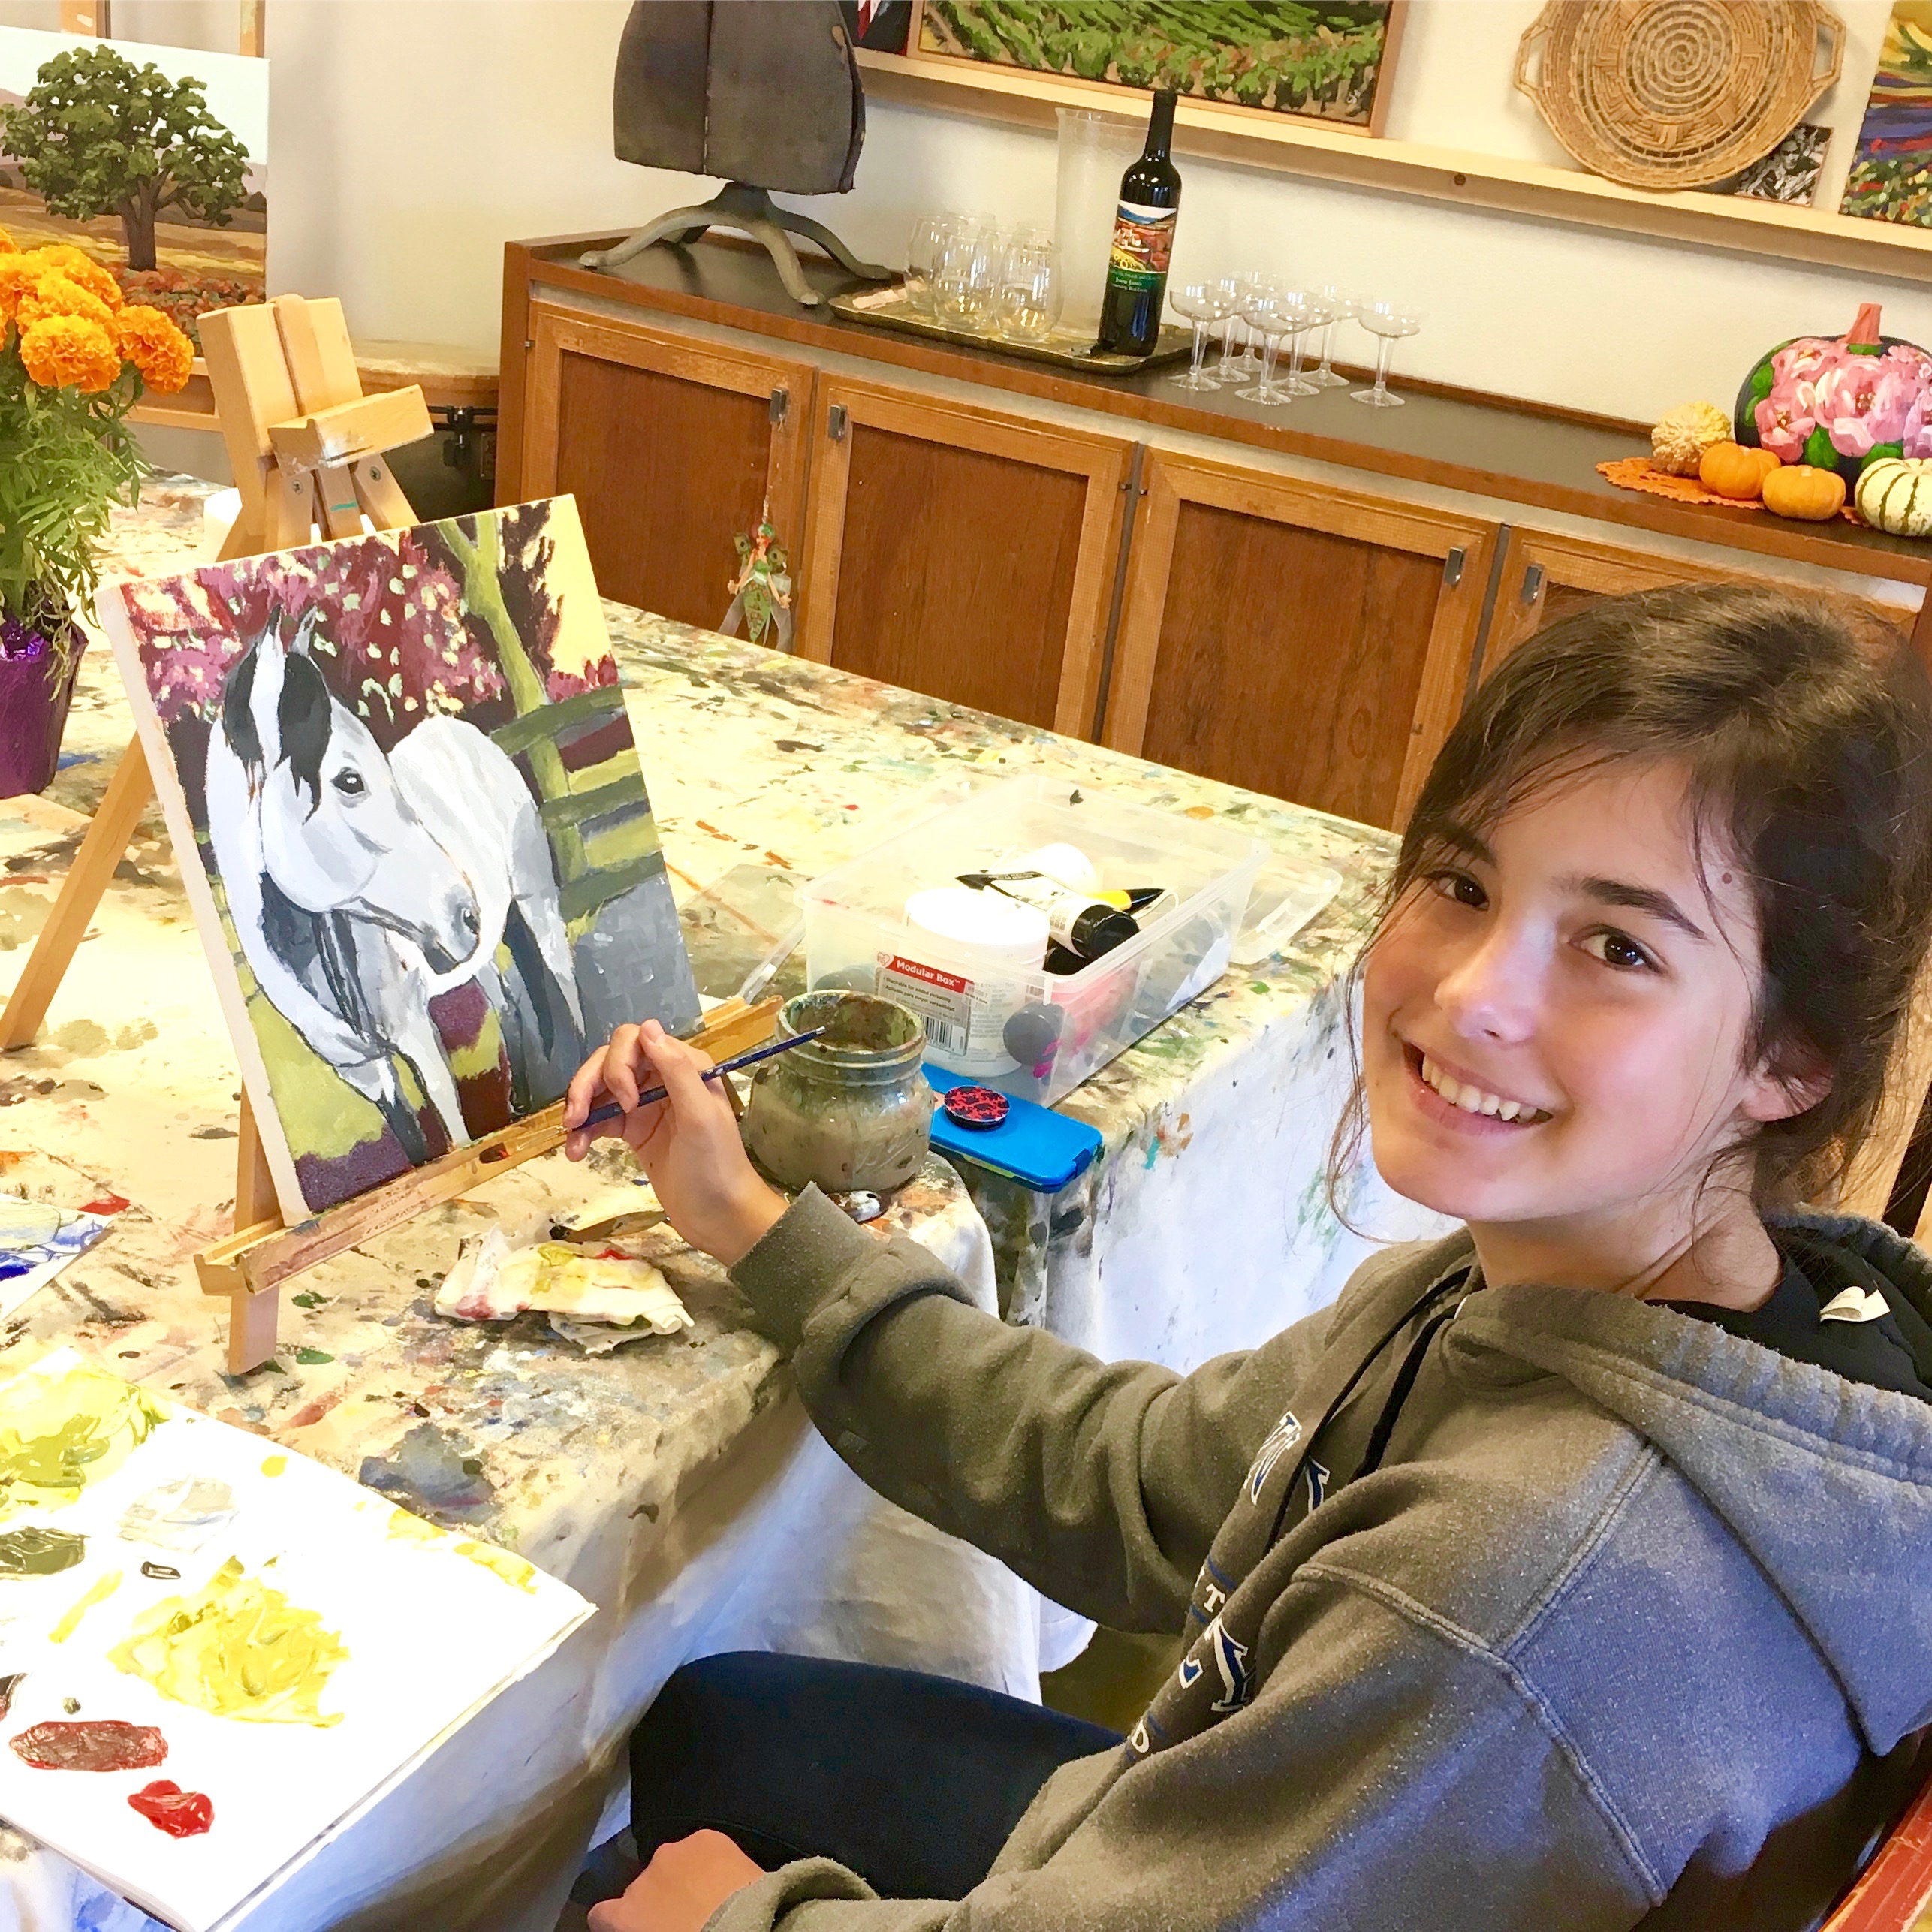 private art lessons, gypsy studios, kids art classes, painting lessons for teens, buellton art class